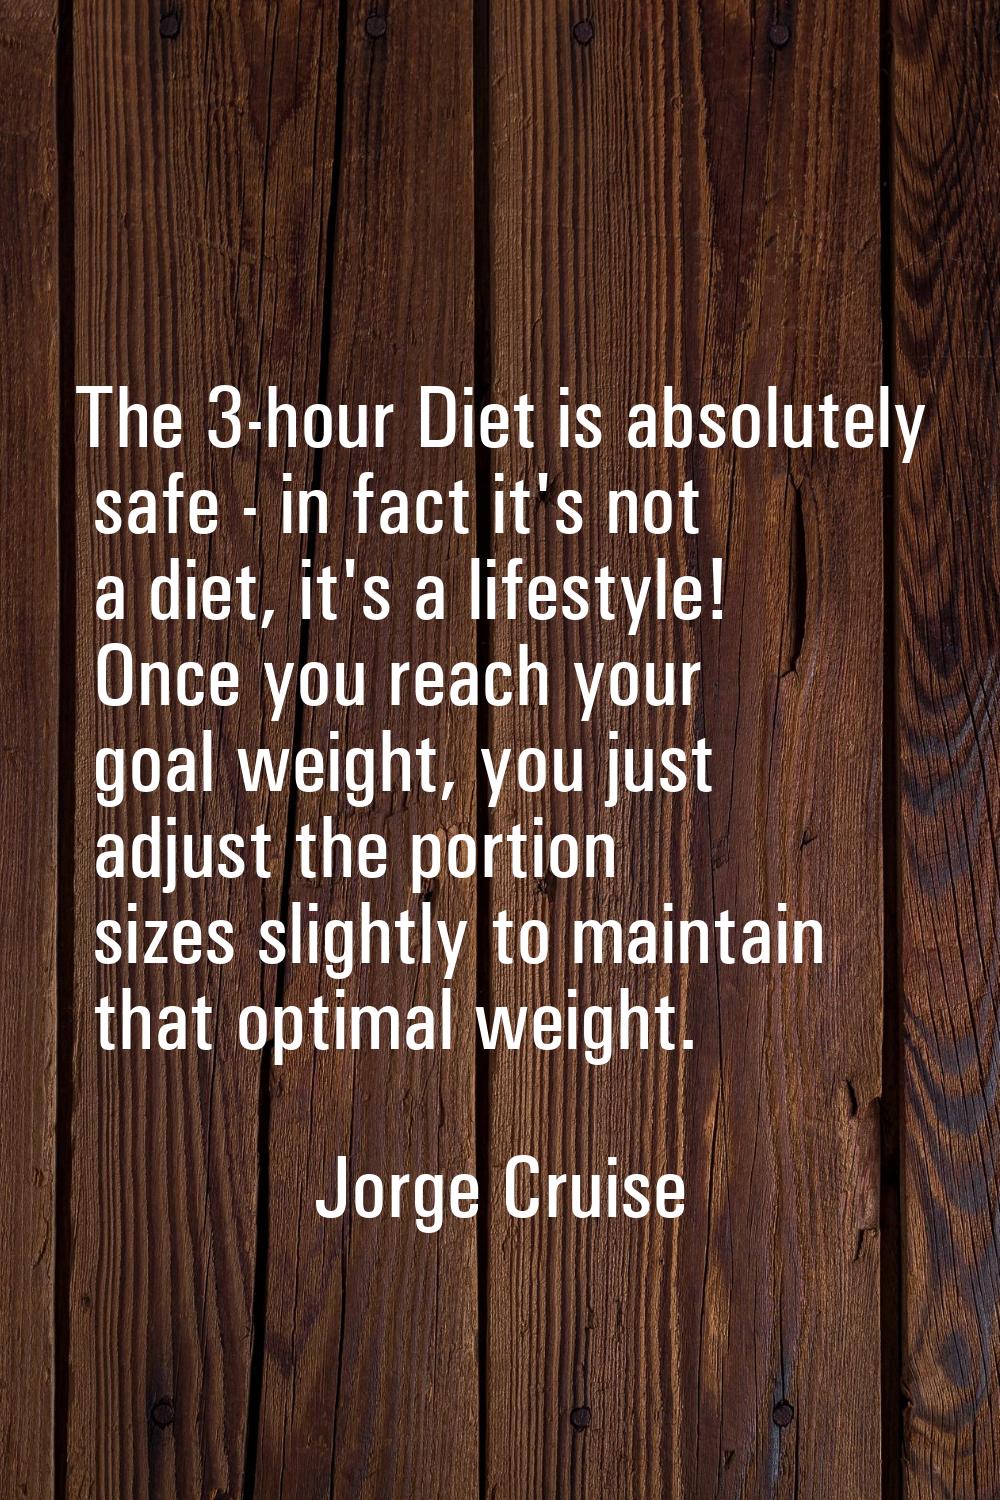 The 3-hour Diet is absolutely safe - in fact it's not a diet, it's a lifestyle! Once you reach your